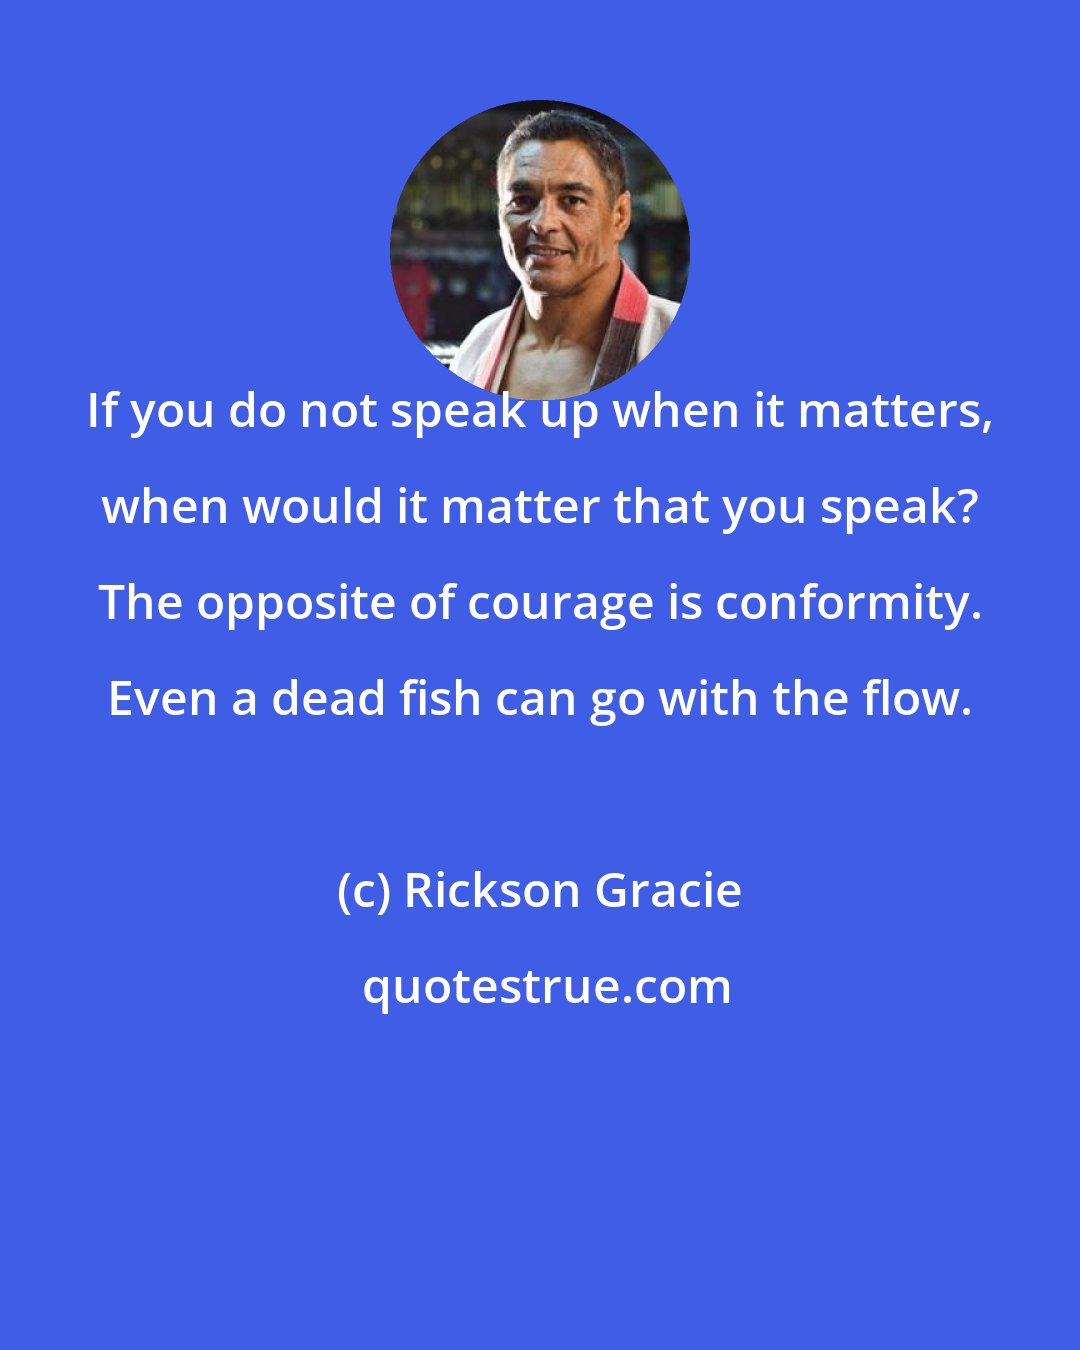 Rickson Gracie: If you do not speak up when it matters, when would it matter that you speak? The opposite of courage is conformity. Even a dead fish can go with the flow.